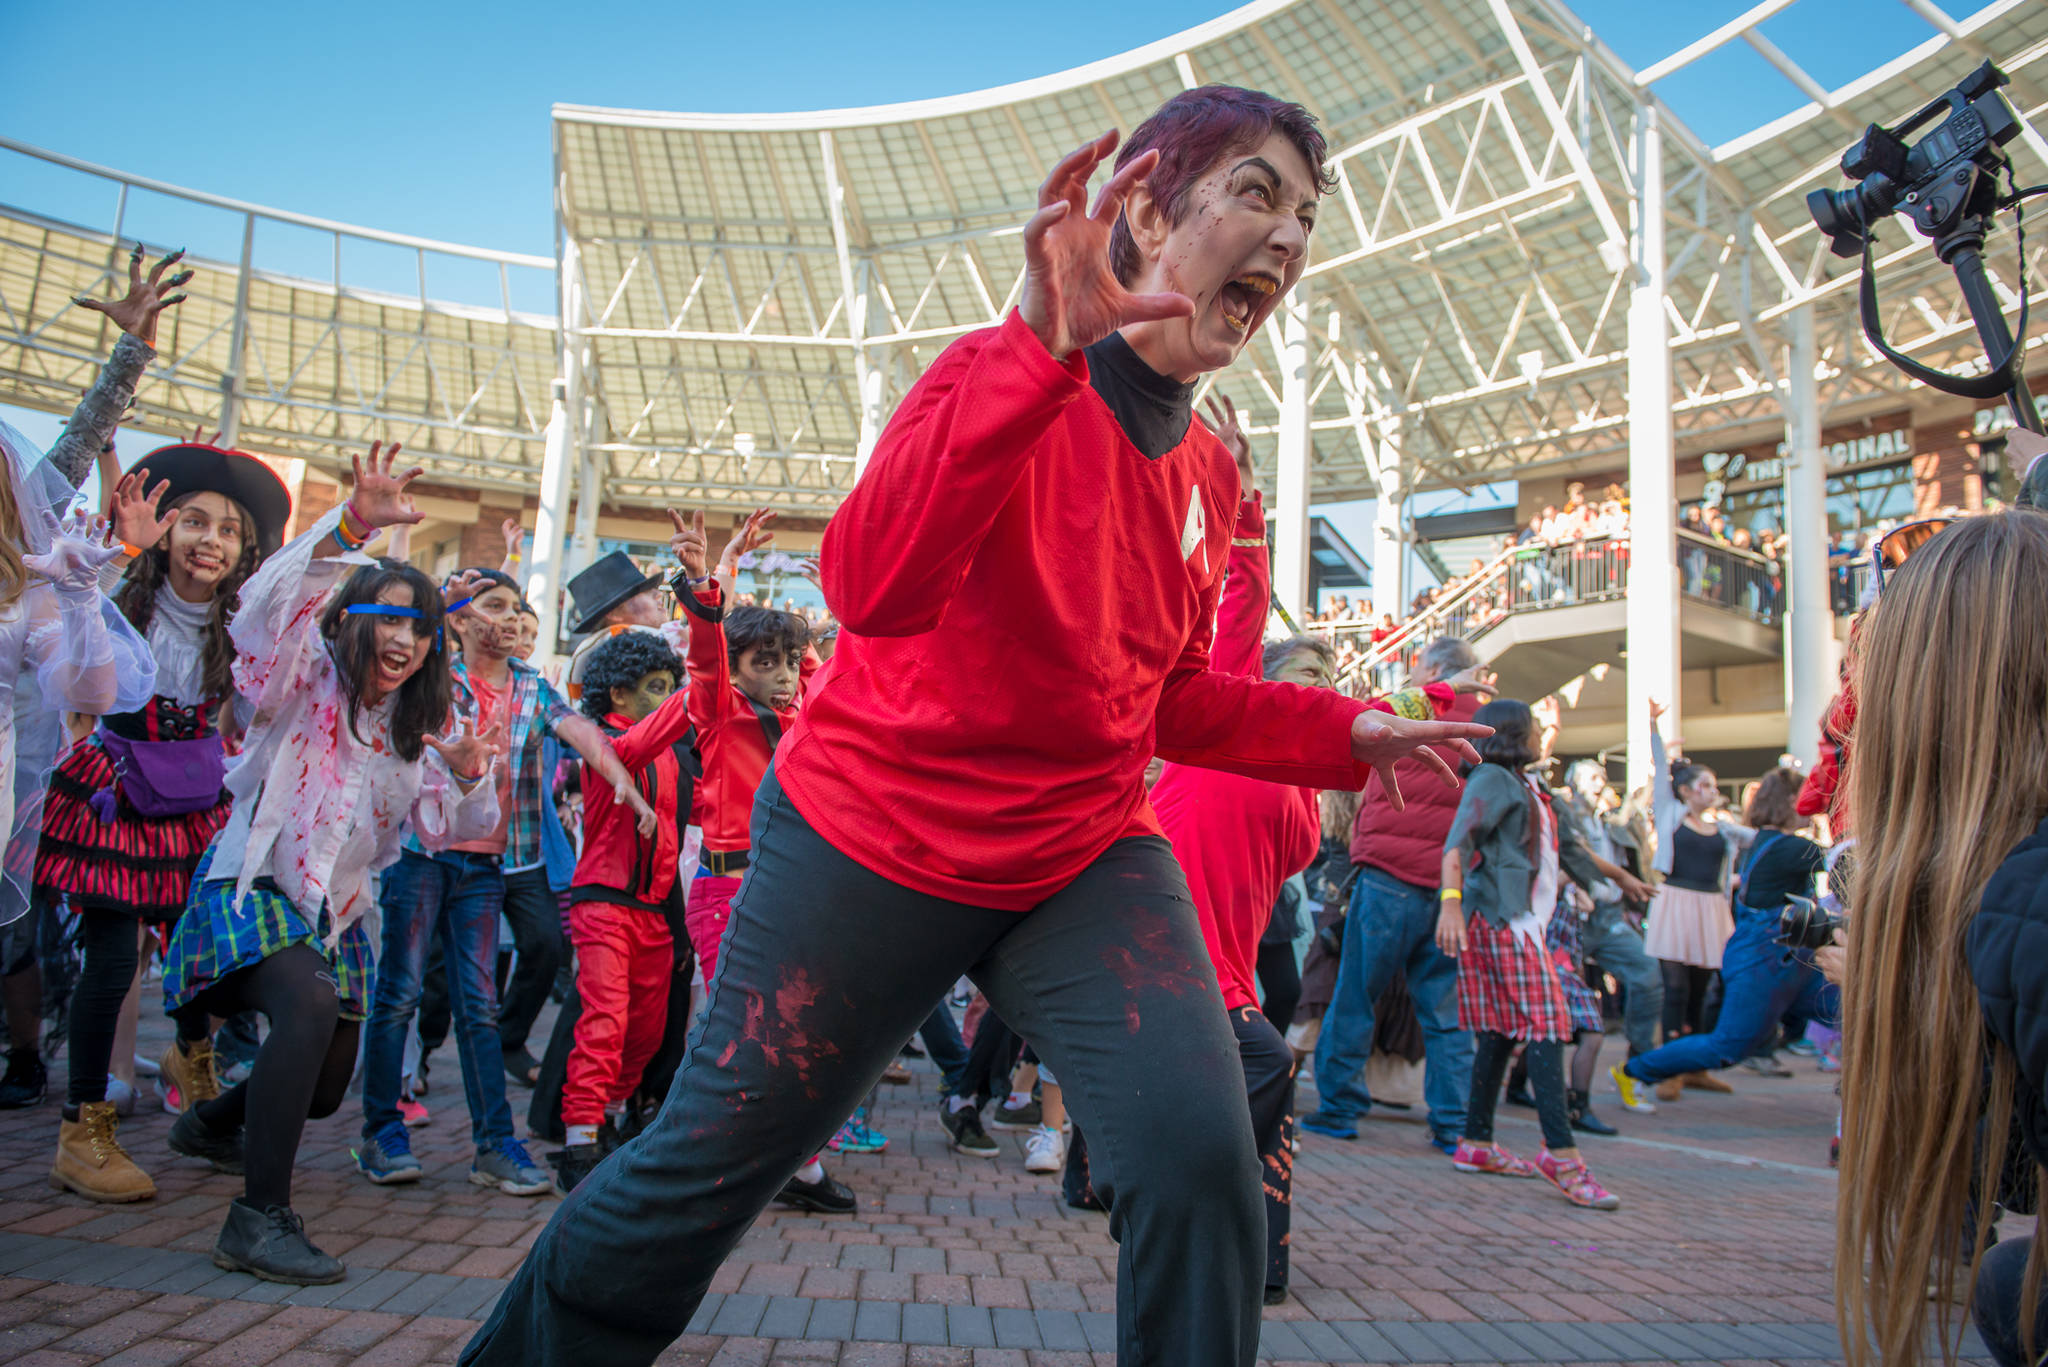 Redmond Town Center became zombie-fied last Saturday during the annual “Thrill the World” dance party. “Thrill the World” is simultaneously performed to Michael Jackson’s “Thriller” in more than 150 cities throughout 30 countries to raise money for charity. Redmond Zombies and nonprofit beneficiary Team Survivor Northwest host the event. Courtesy of Jessica Morgan